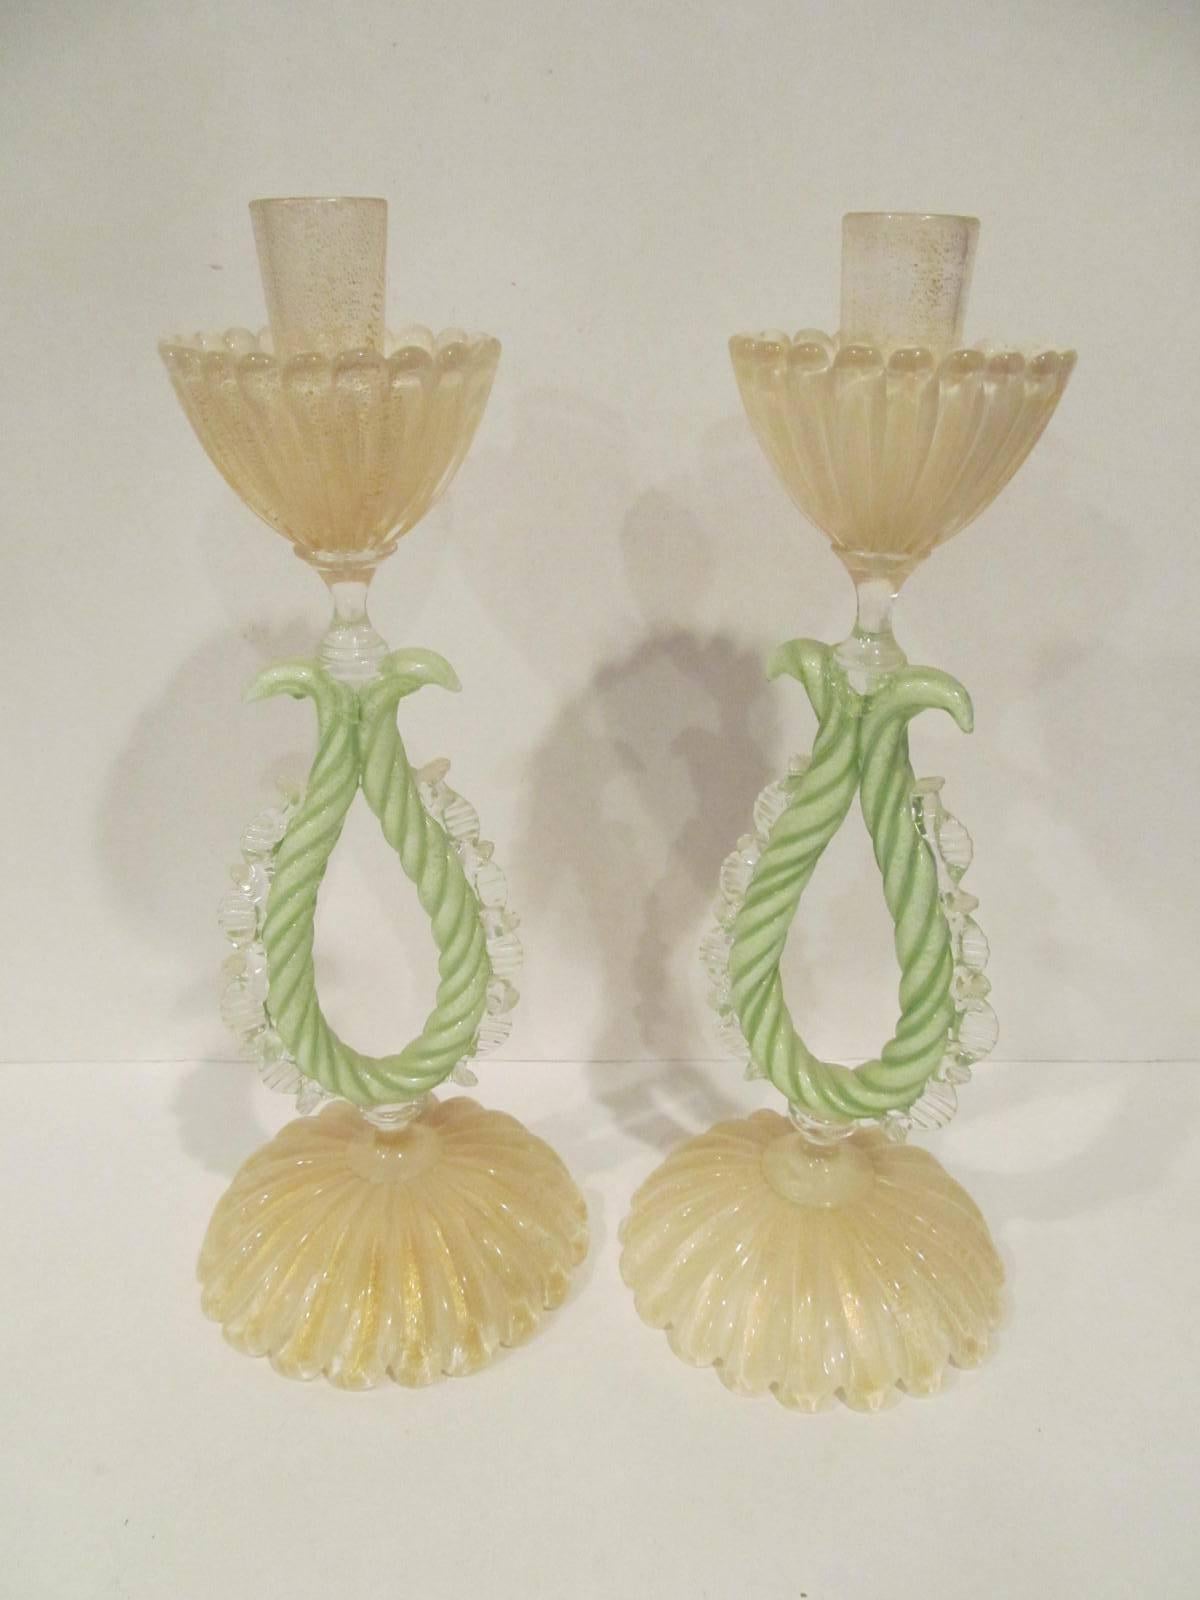 Great pair of Murano candlesticks, circa 1950s. White with gold highlights, clear with gold highlights, with center portion green, with gold highlights.